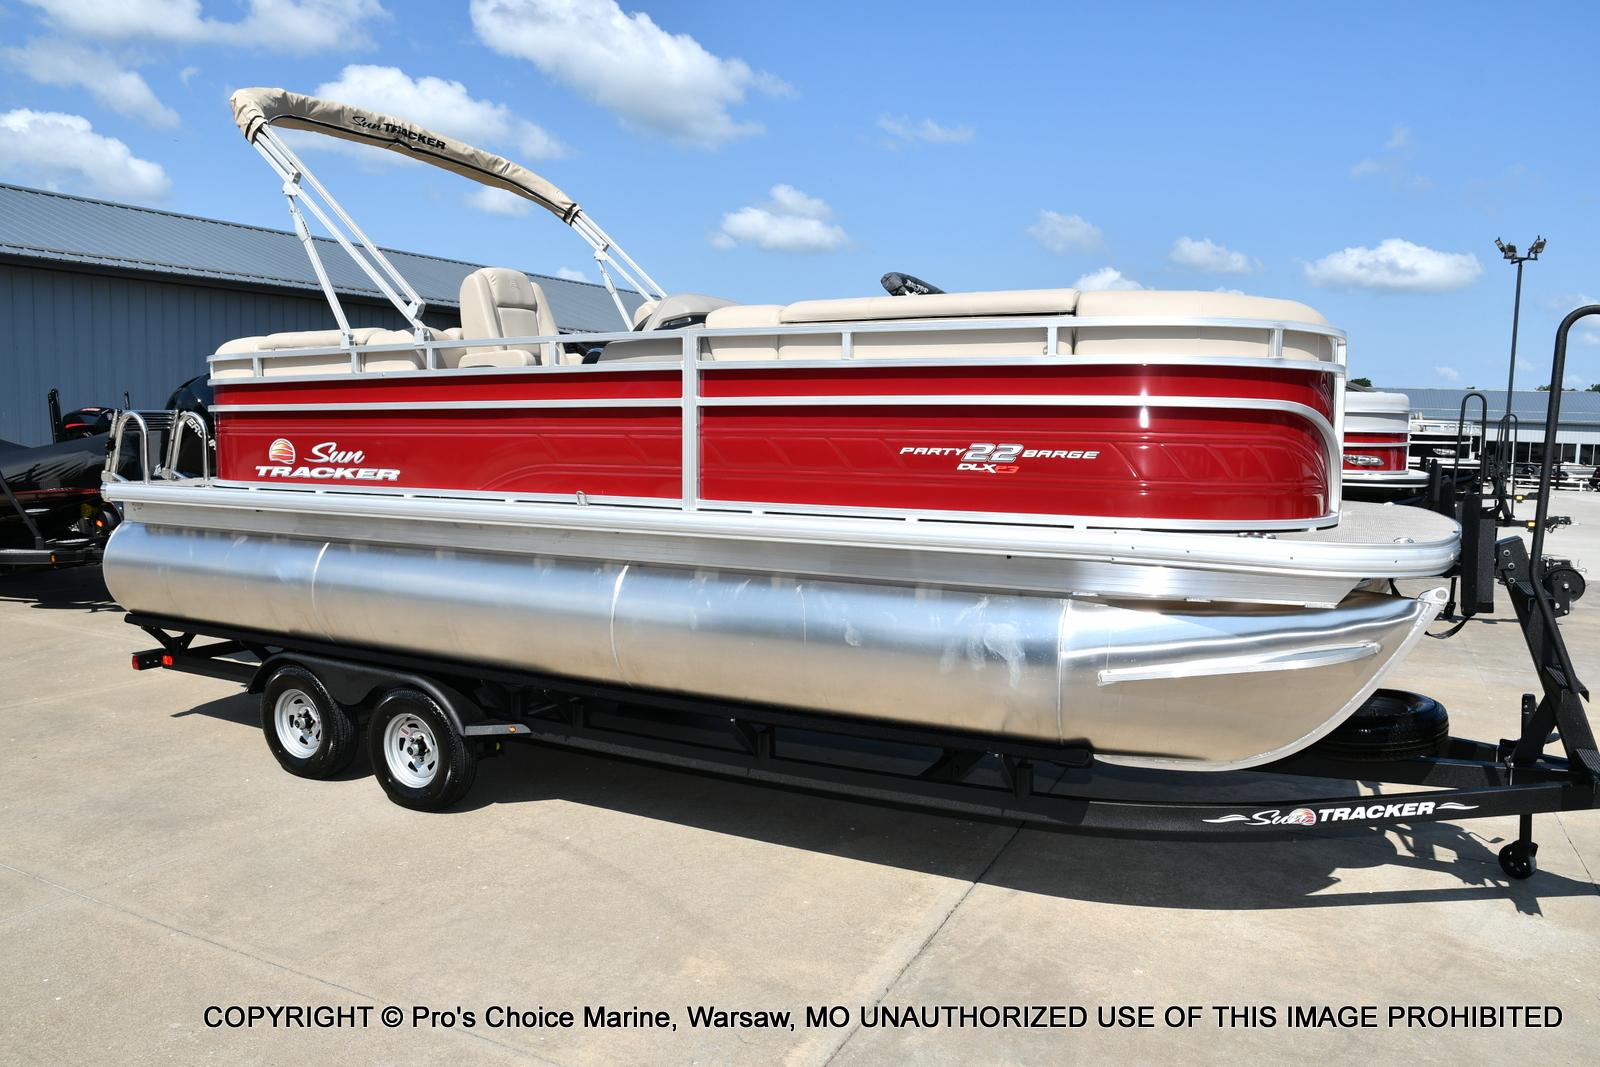 Page 3 of 8 - Used pontoon boats for sale in Missouri 